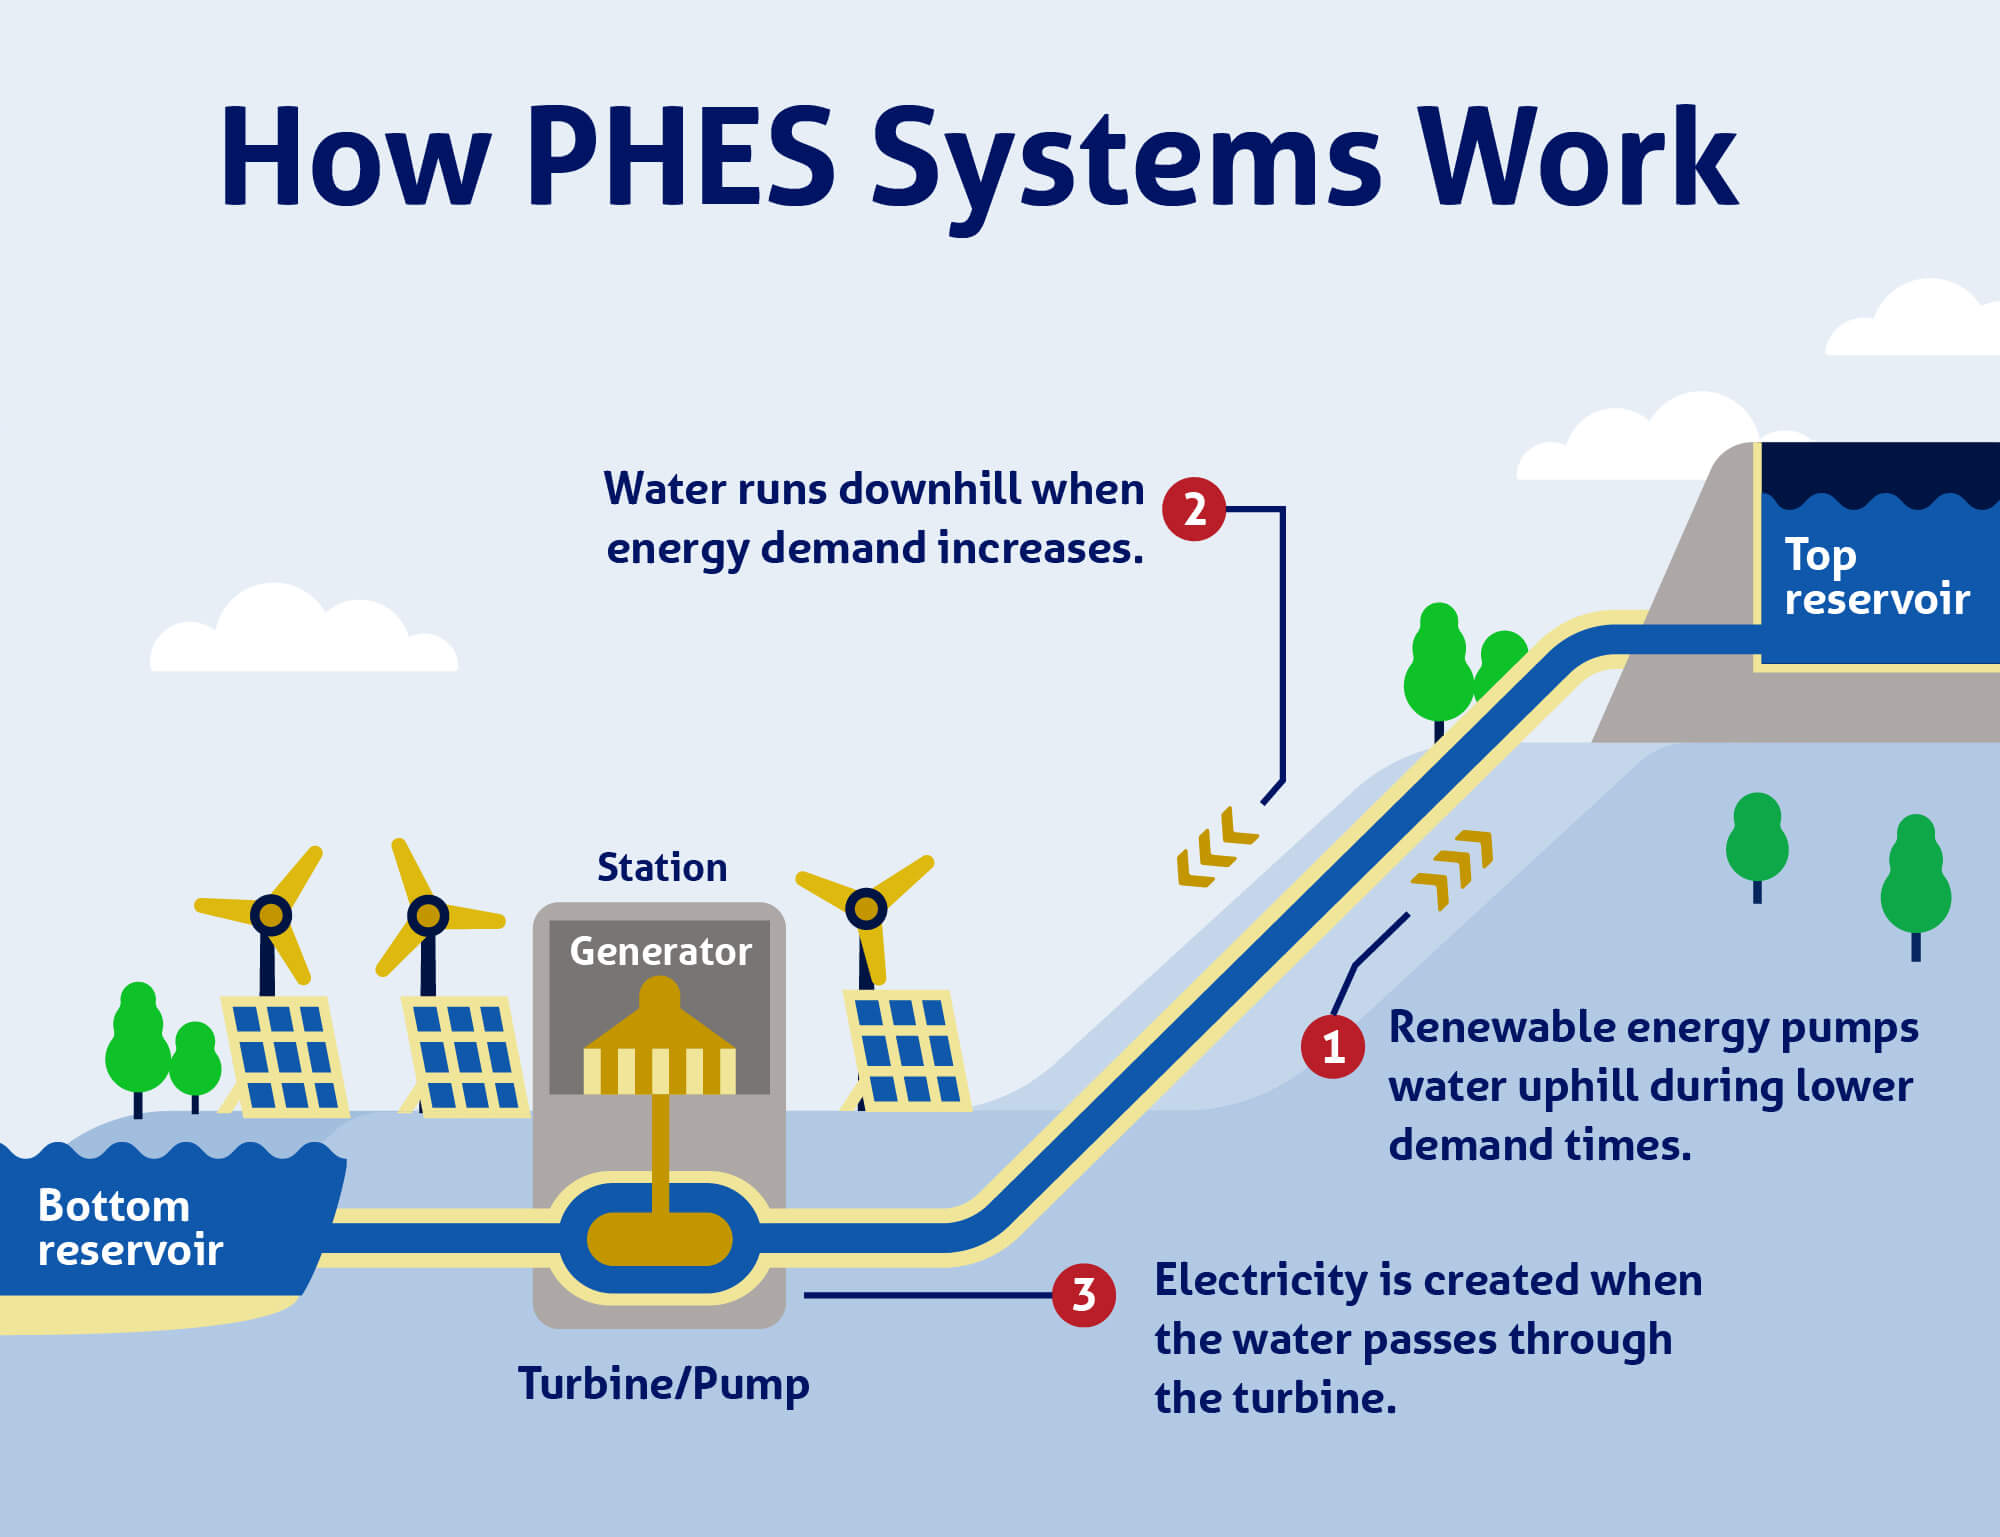 How PHES systems work